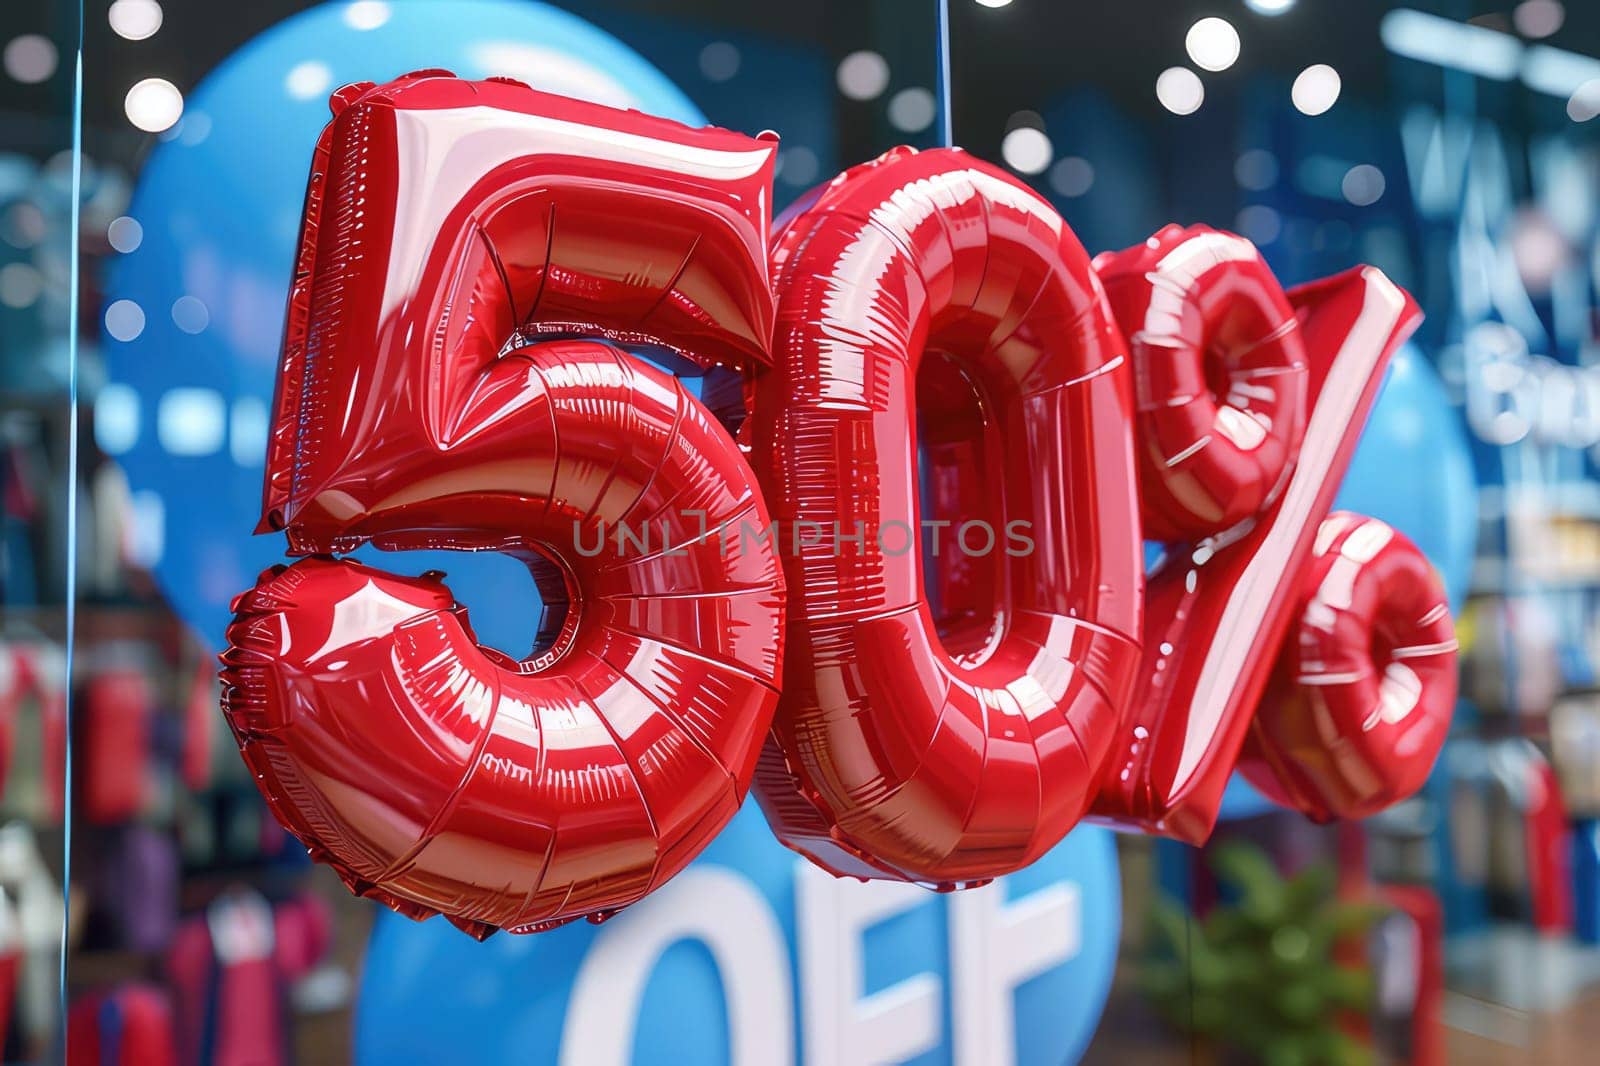 Retail Sale Promotion with Red Balloons Reading 50 Percent Off in a Shopping Mall Setting by Dvorak